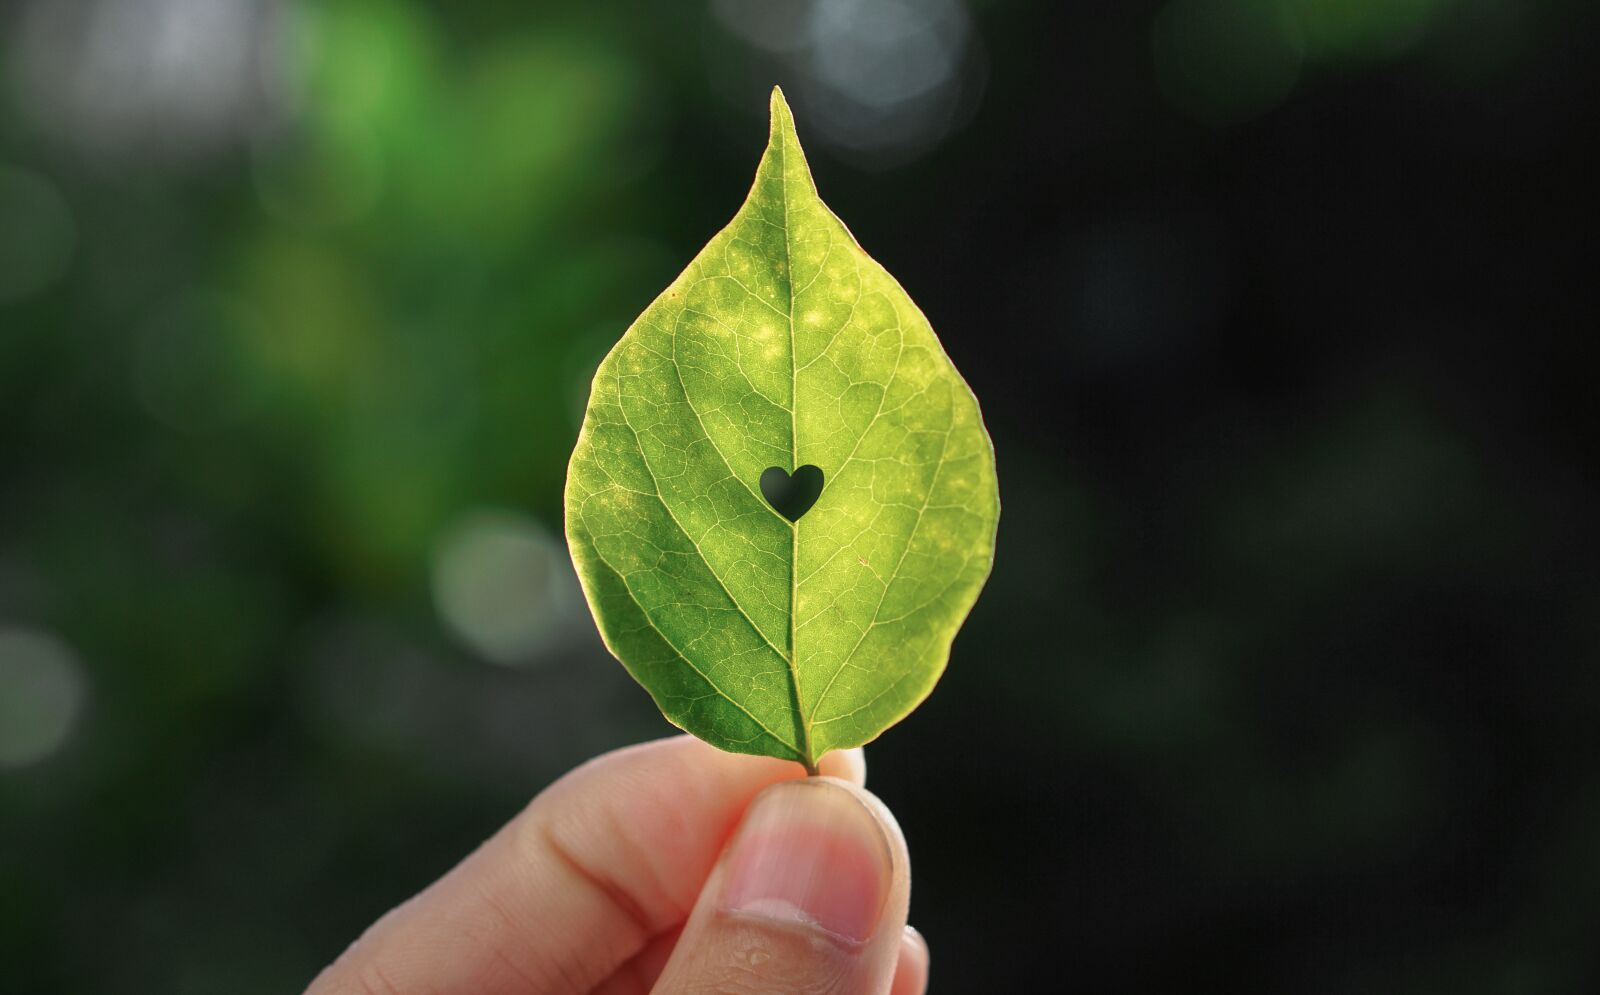 Sony a6000 sample photo. Heart, leaf, nature photography